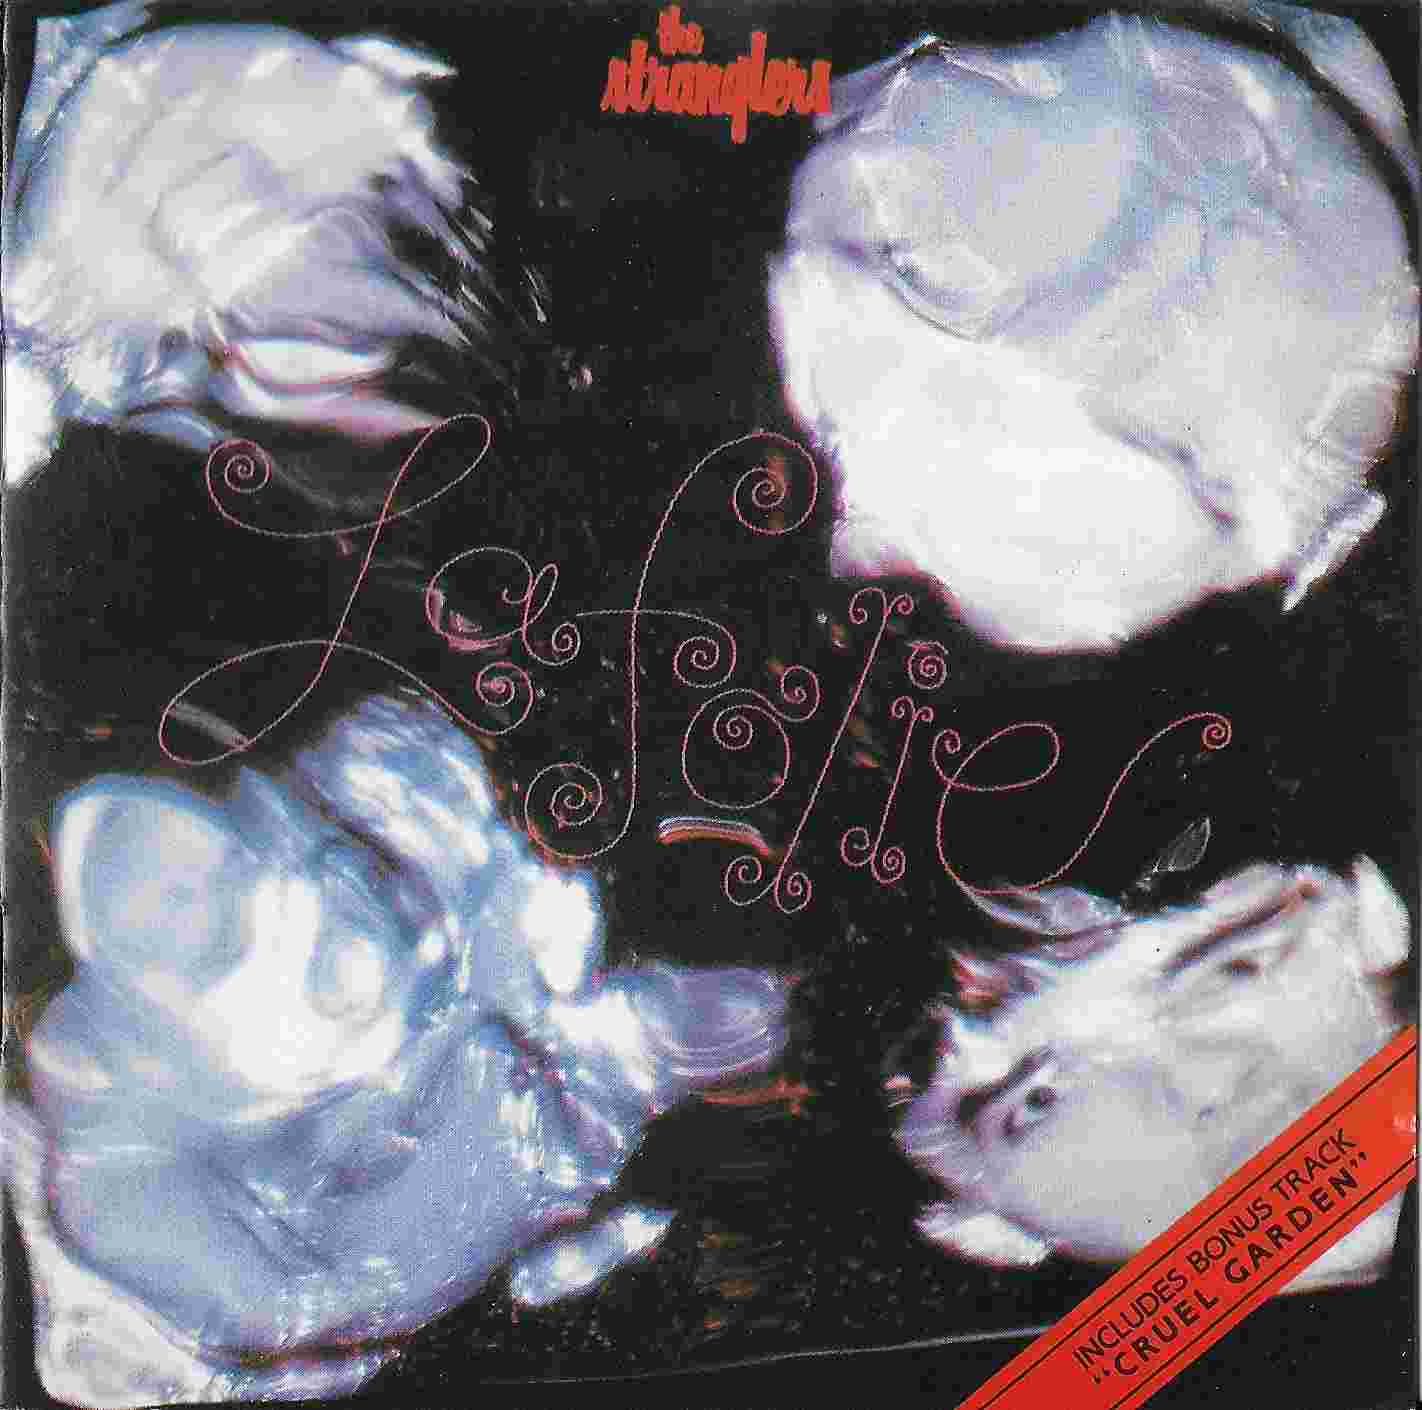 Picture of CDP 746614-2 La folie by artist The Stranglers from The Stranglers